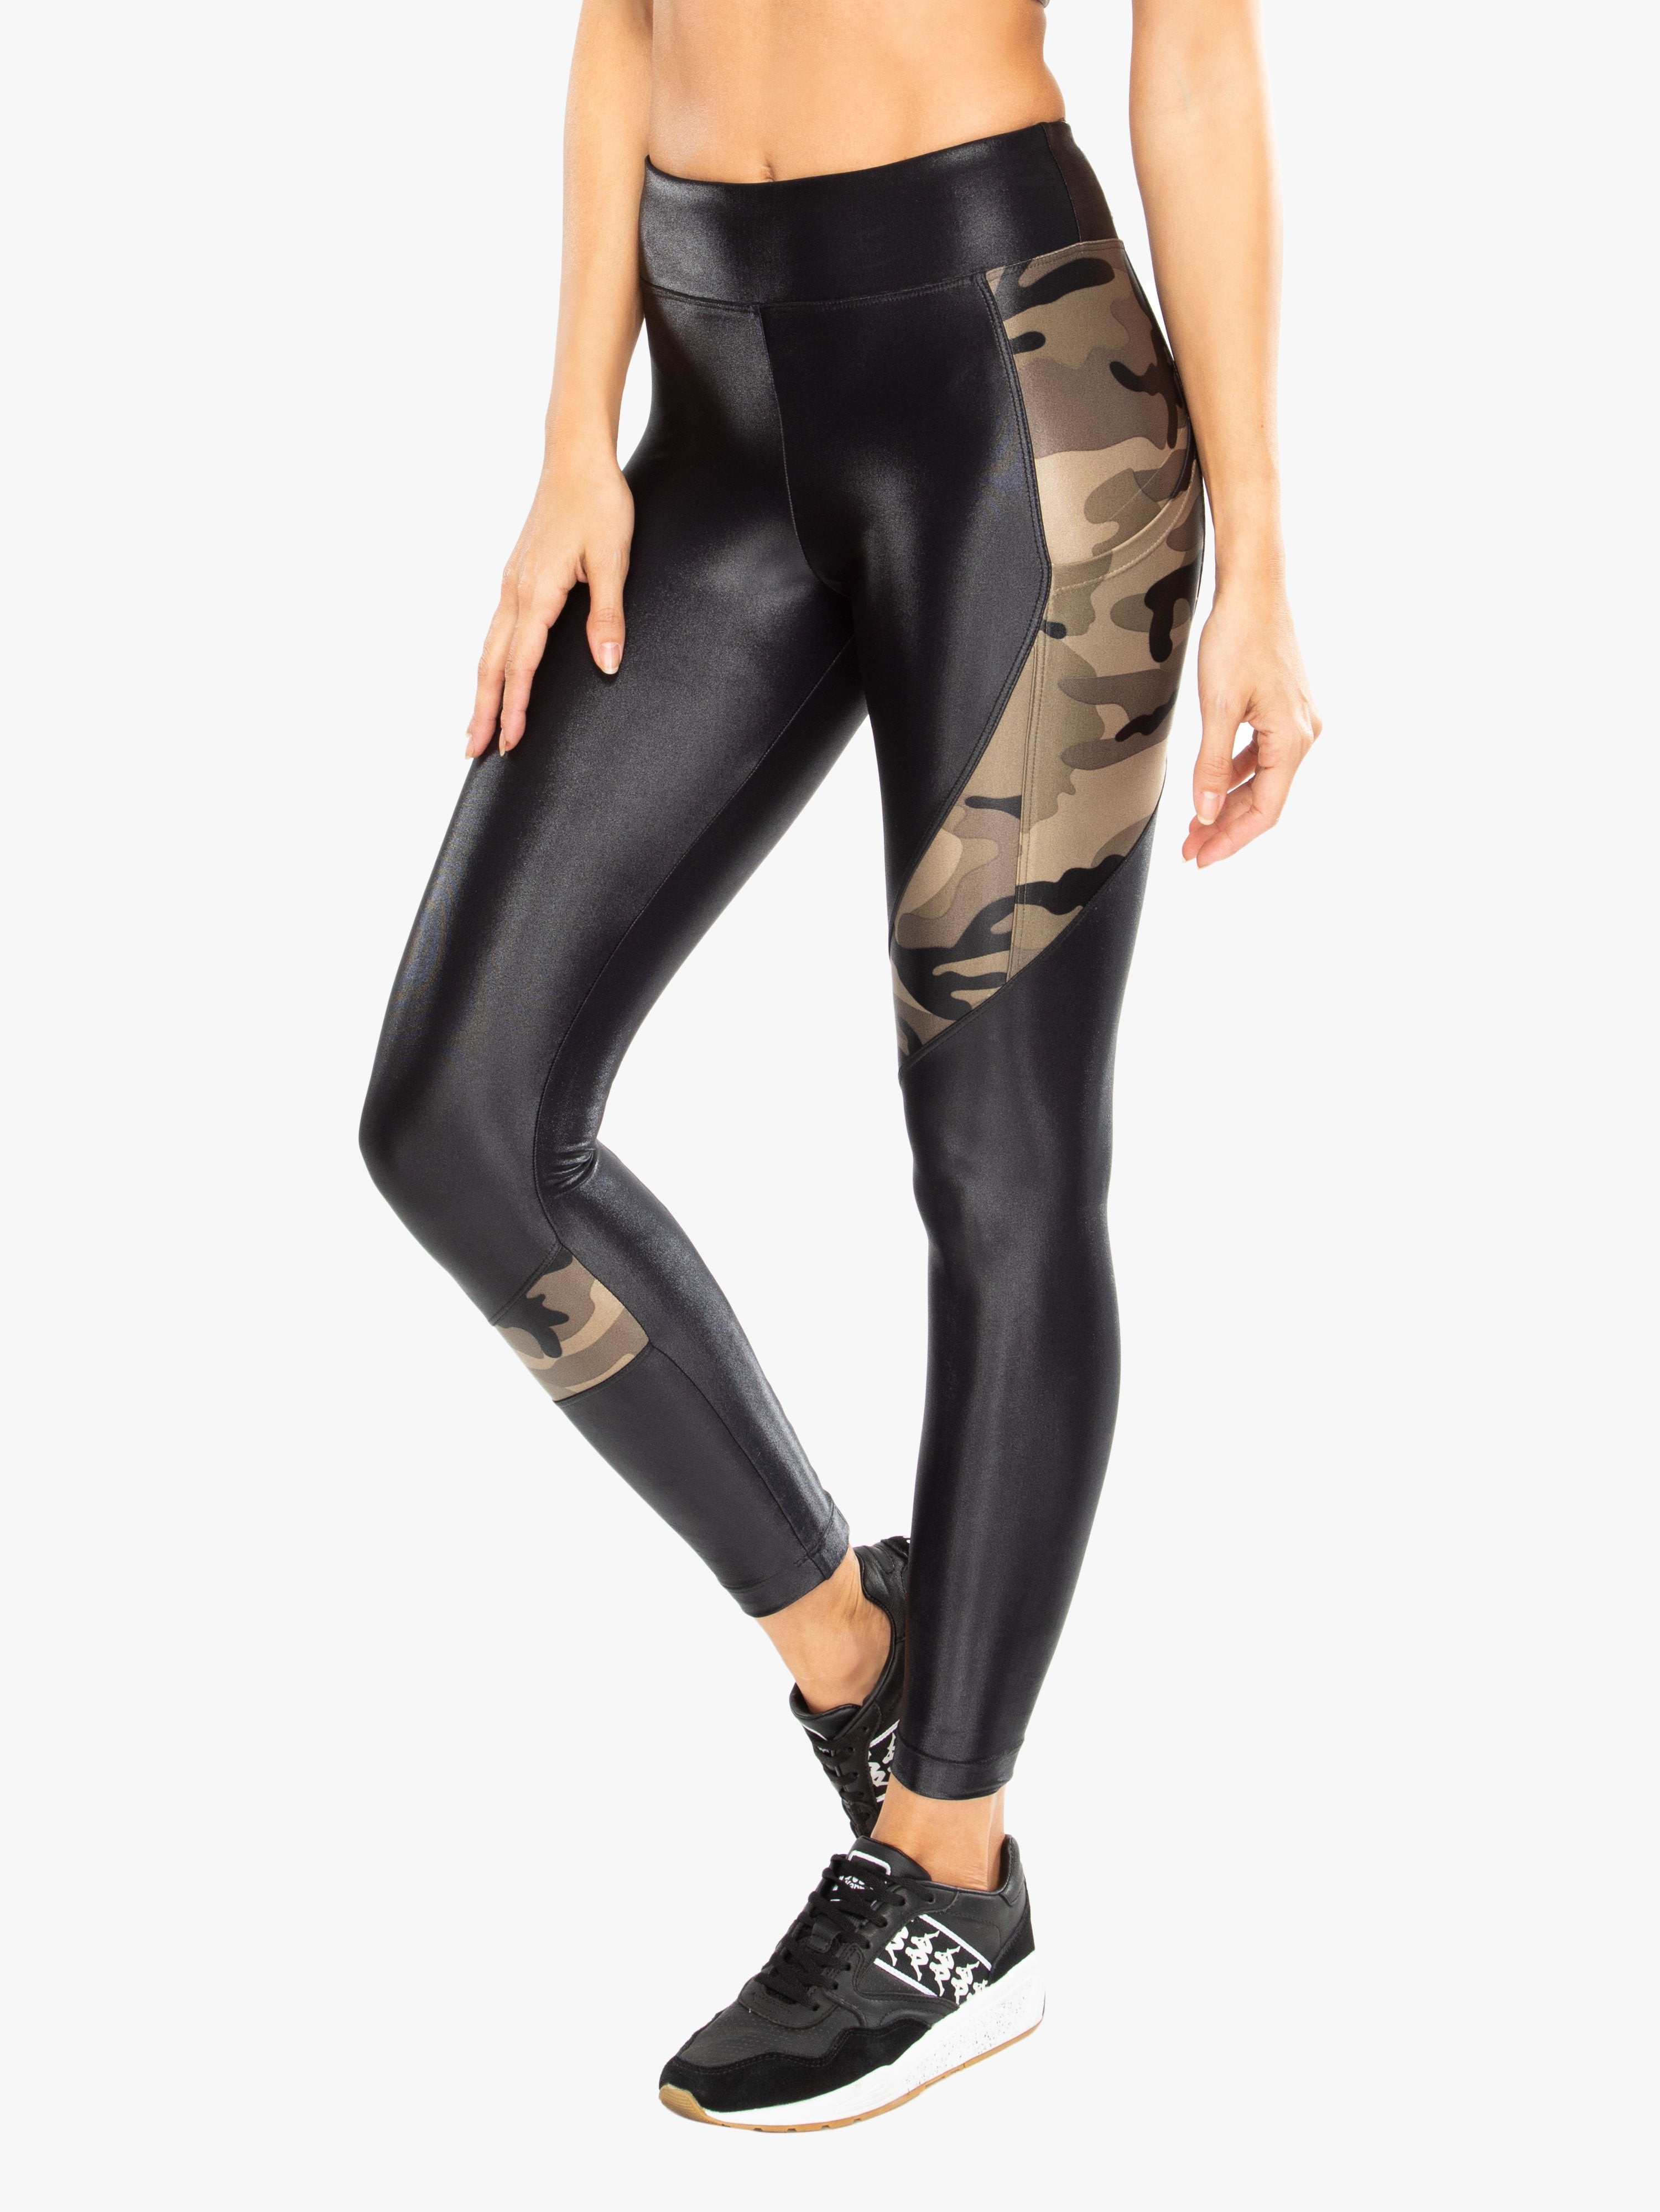 Koral - Pista Infinity High Rise Legging - Black Camo – Stoopher & Boots